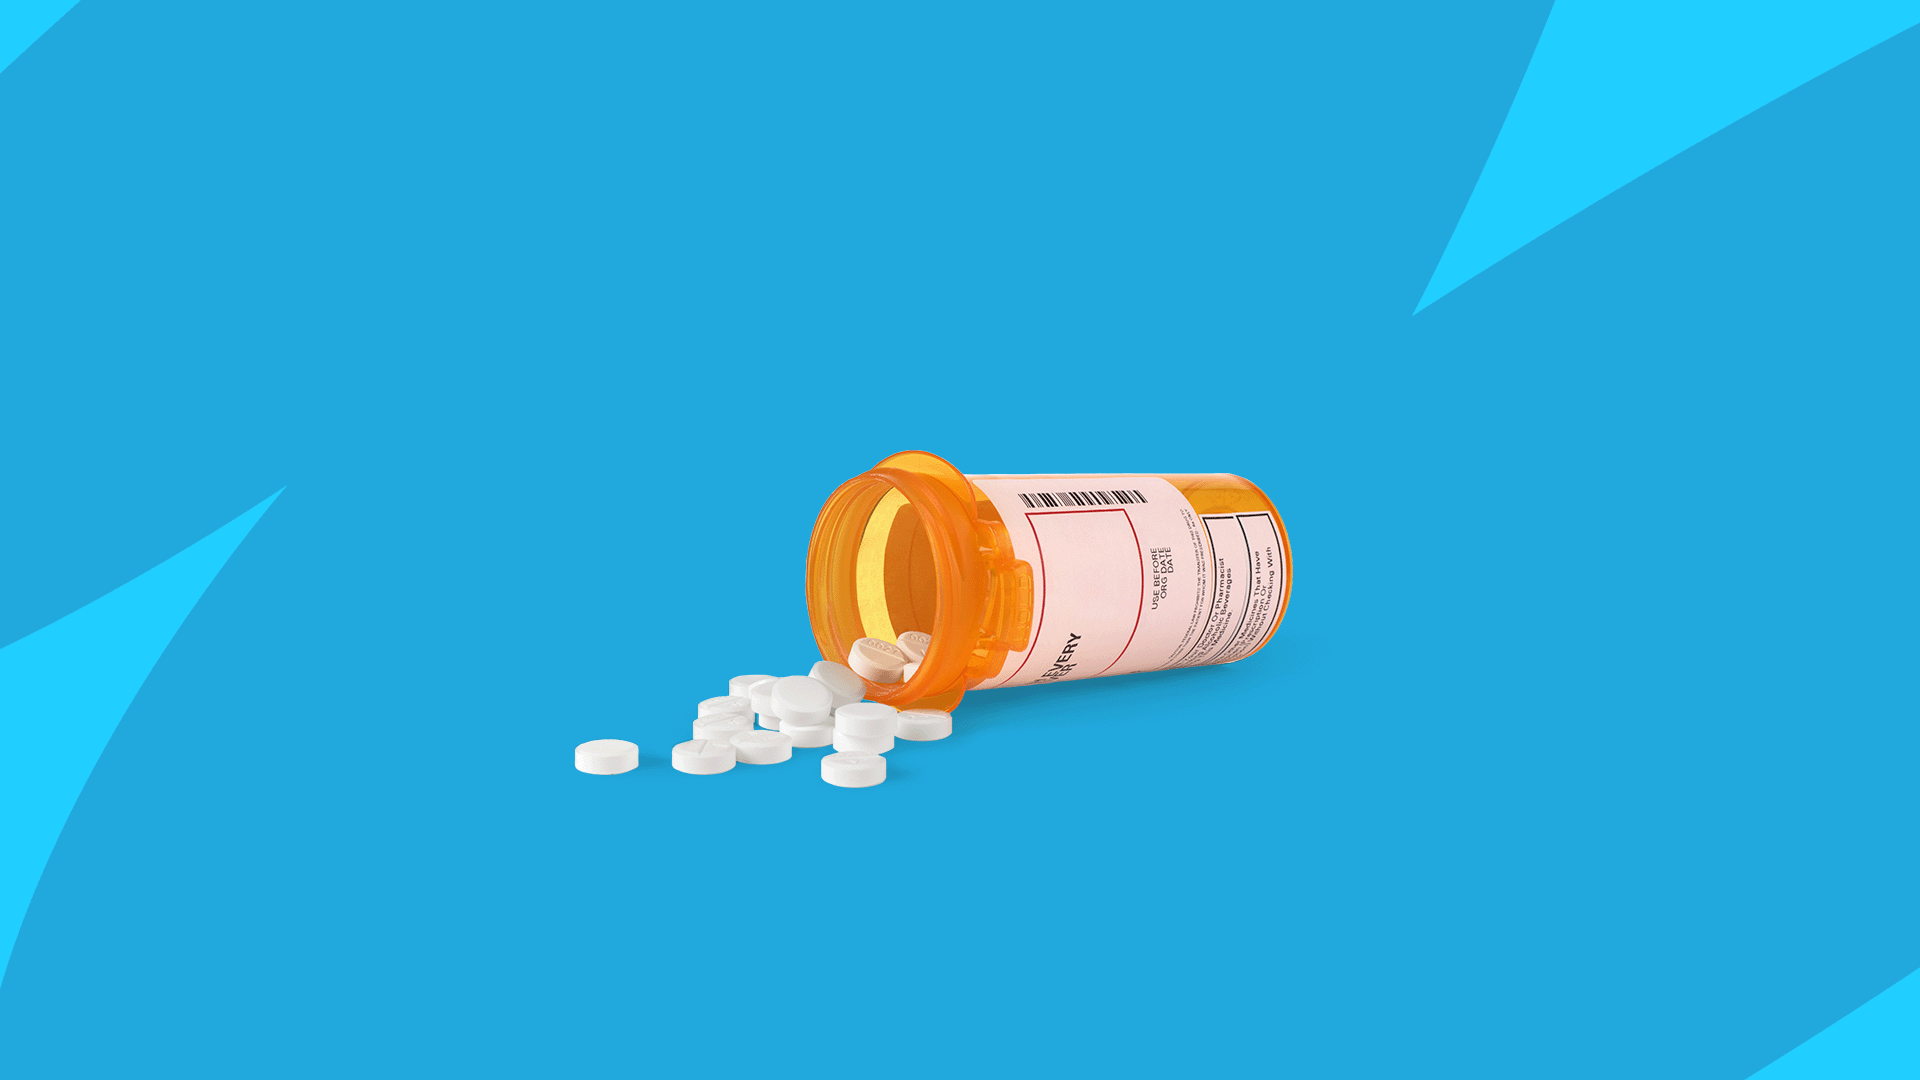 What causes overdose? Diagnosis, prevention, and treatment